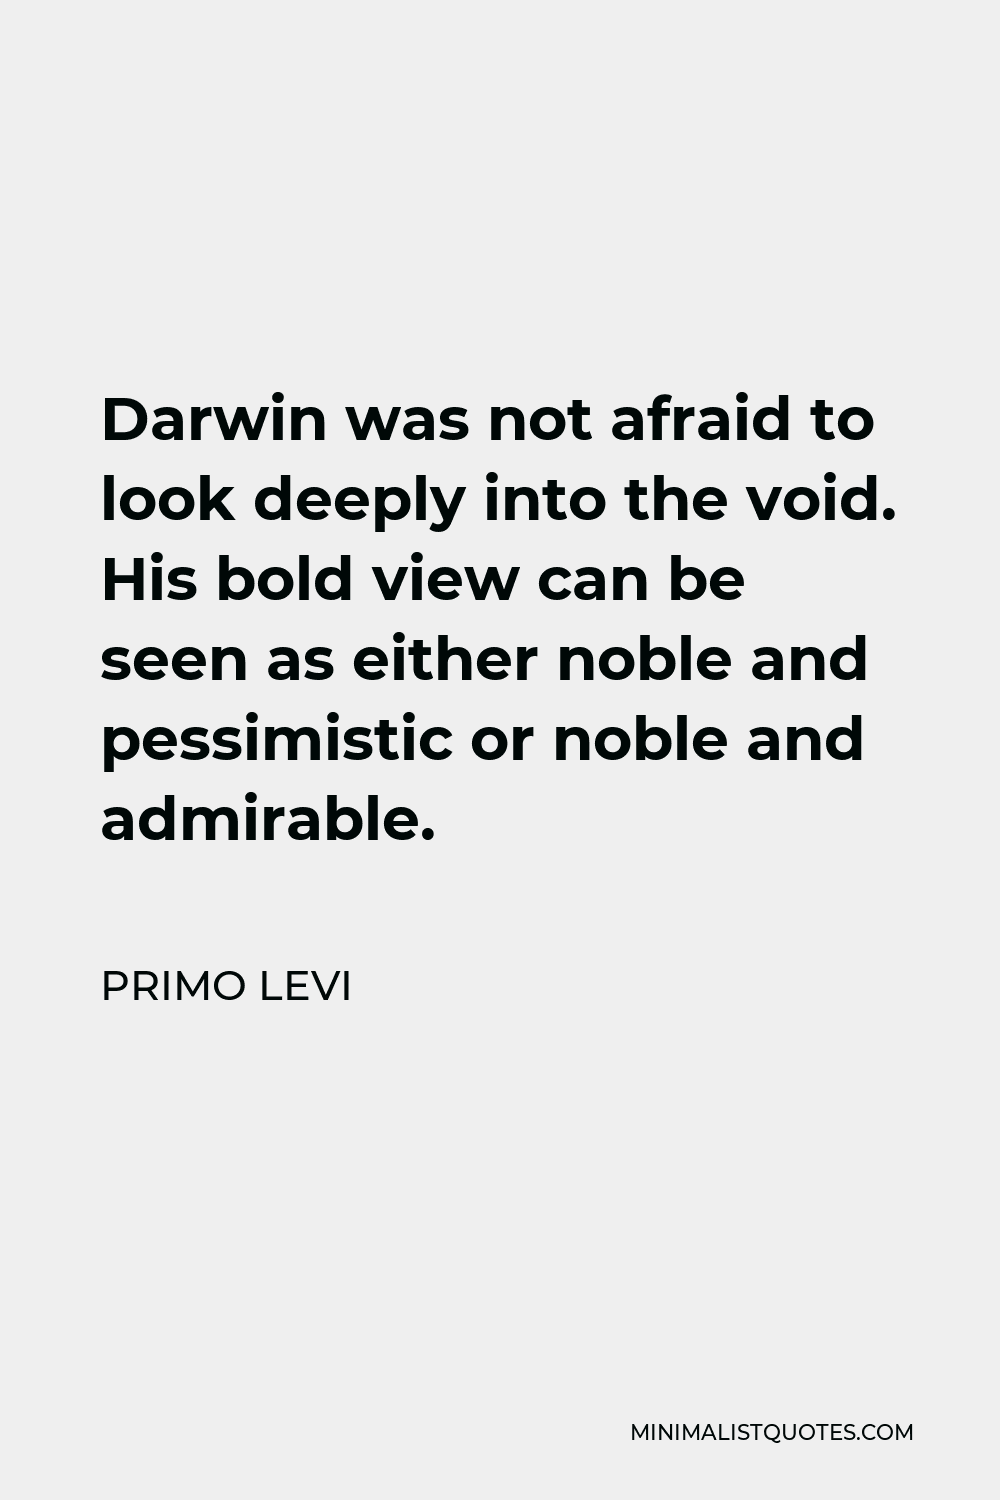 Primo Levi Quote - Darwin was not afraid to look deeply into the void. His bold view can be seen as either noble and pessimistic or noble and admirable.